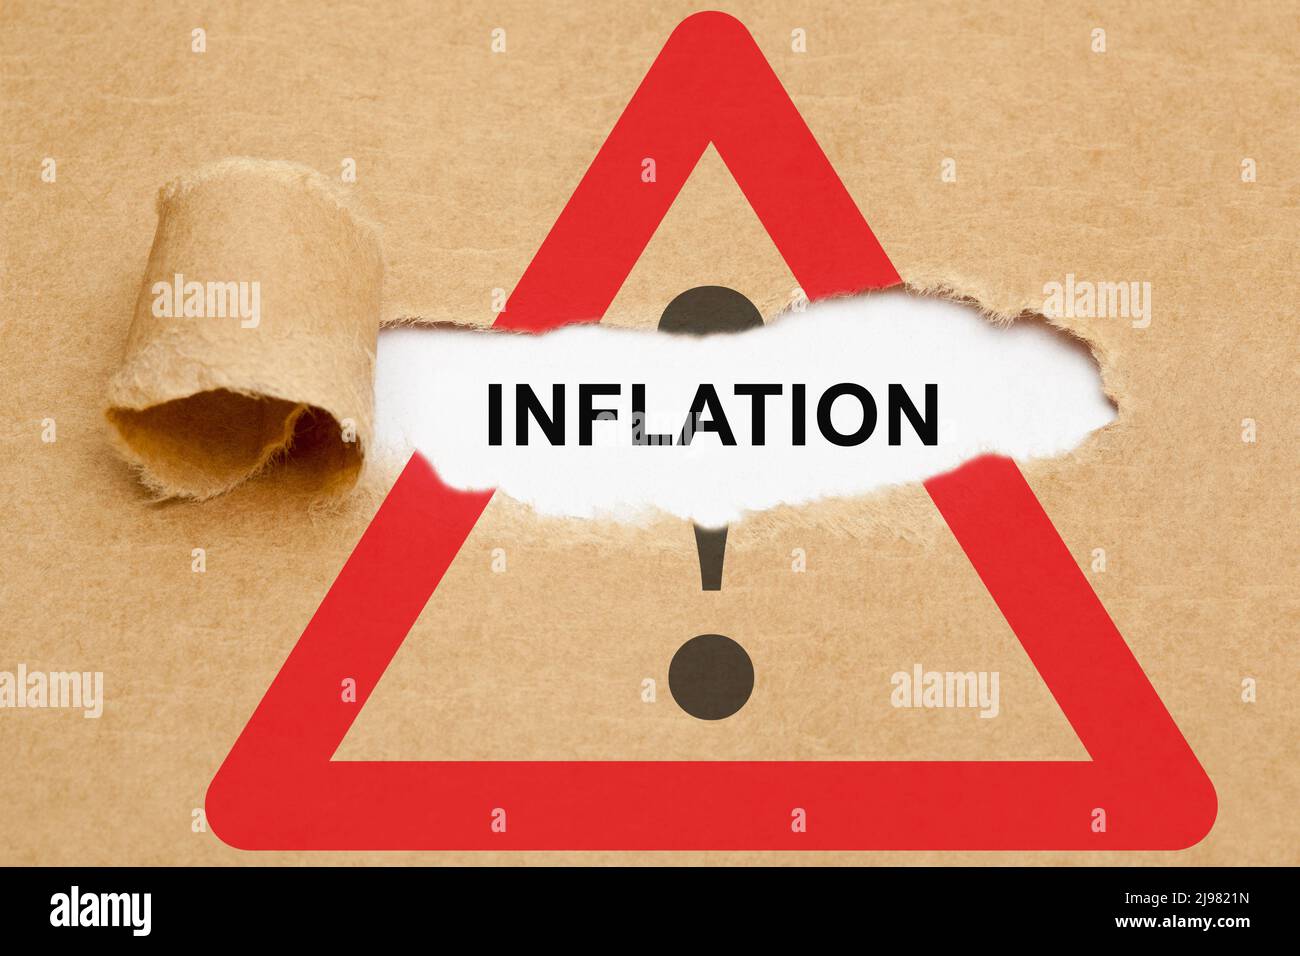 Word Inflation appearing behind torn brown paper on Attention road sign. Concept about increasing inflation rate and approaching financial crisis. Stock Photo